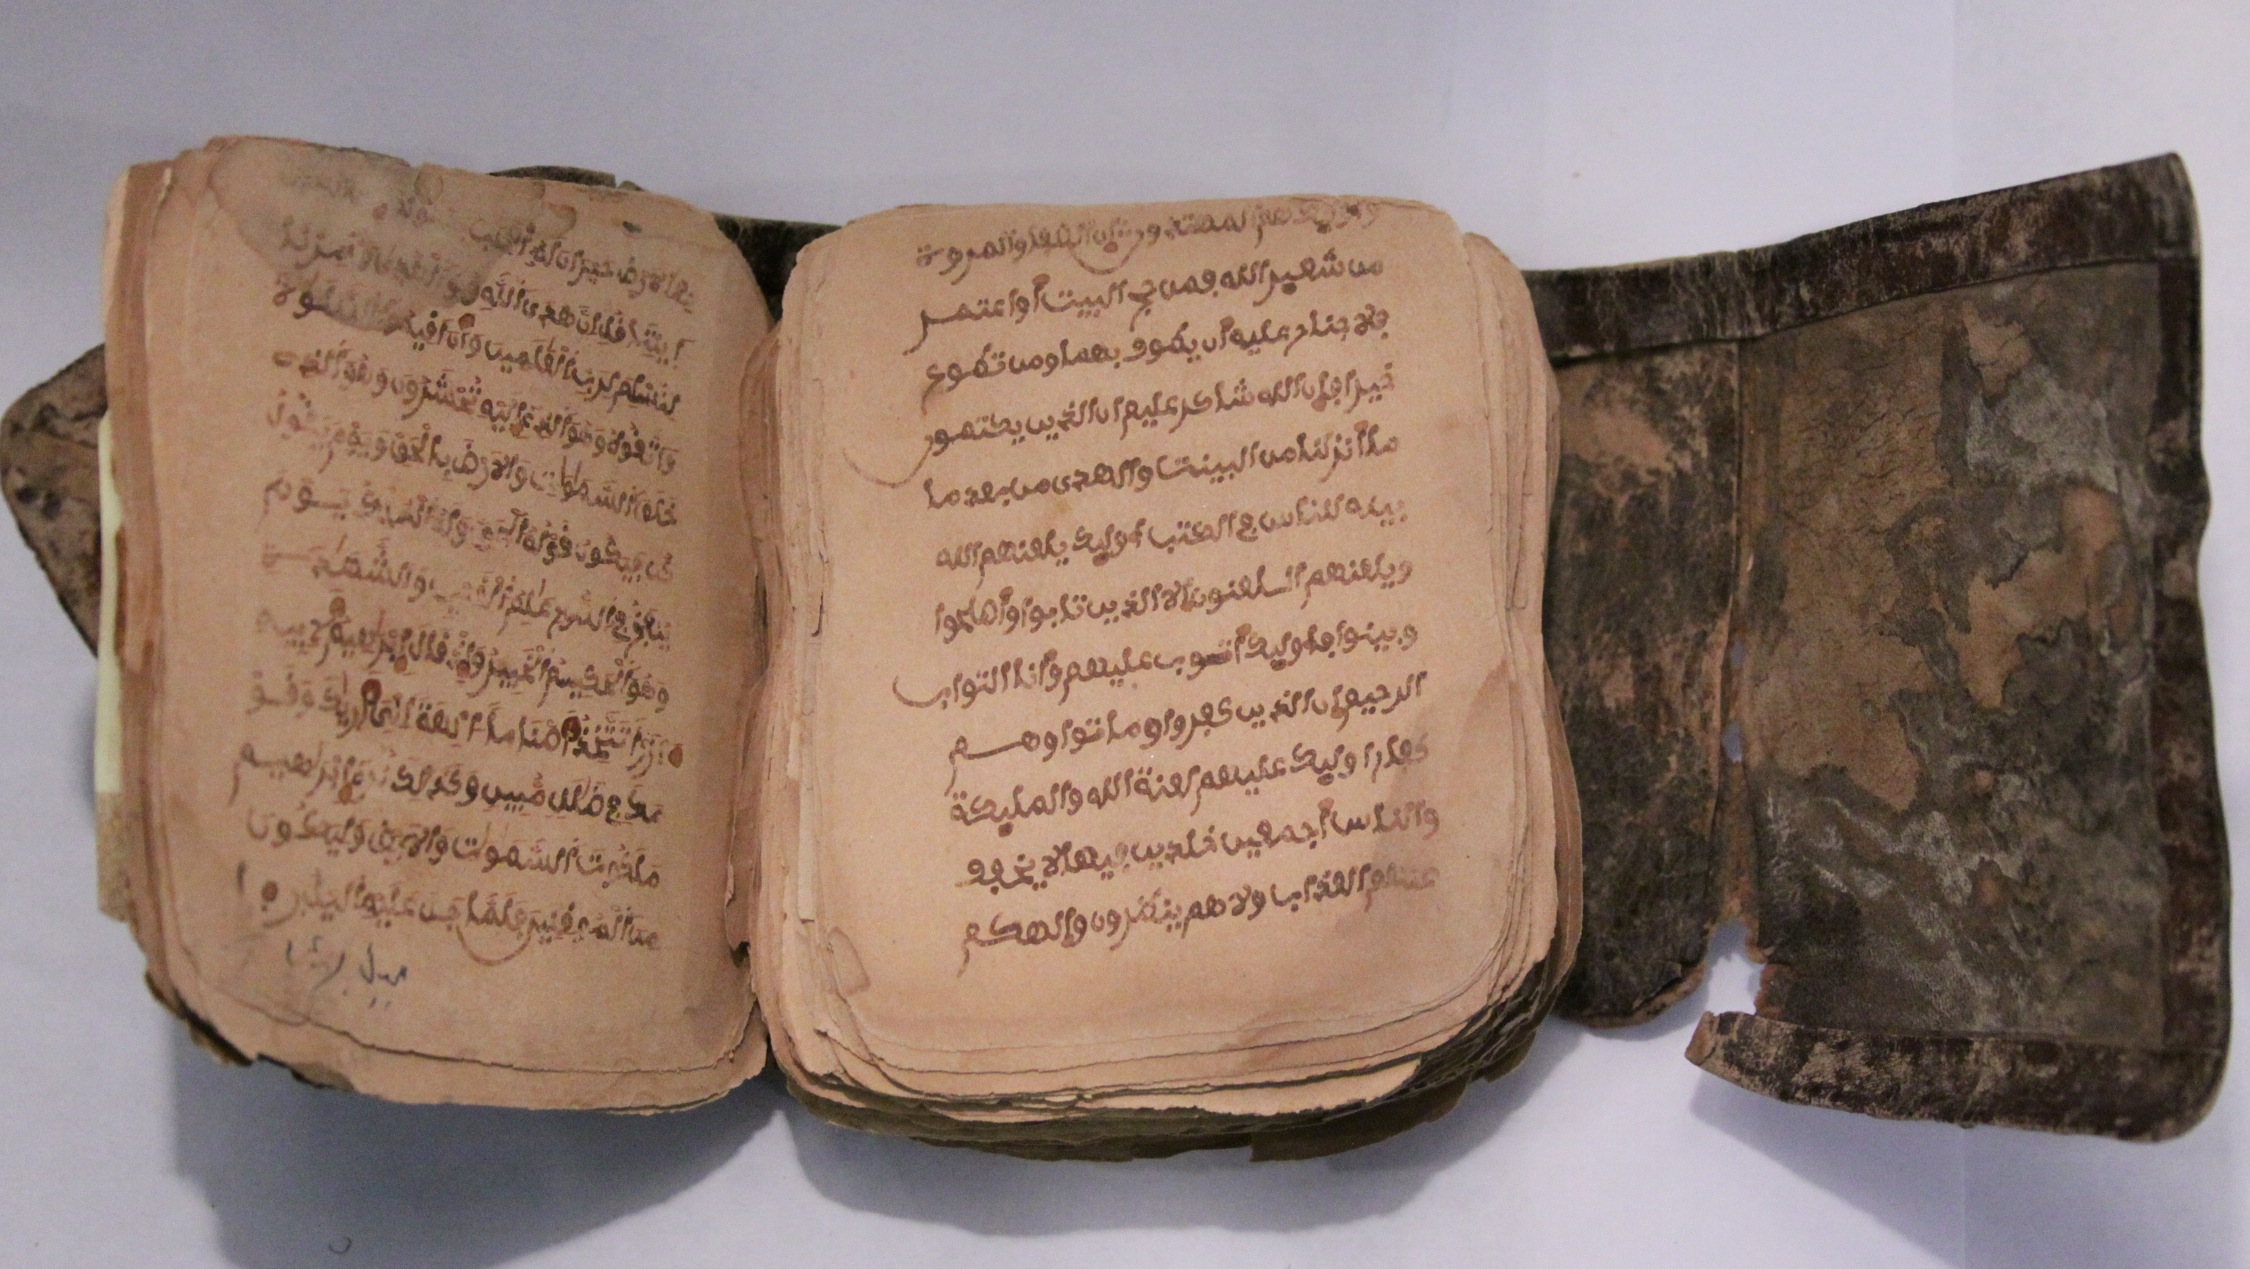 Qur'an manuscript from North Africa, 16th century; Yattara Family Private Library, Timbuktu. All images courtesy of Yattara Family Private Library.